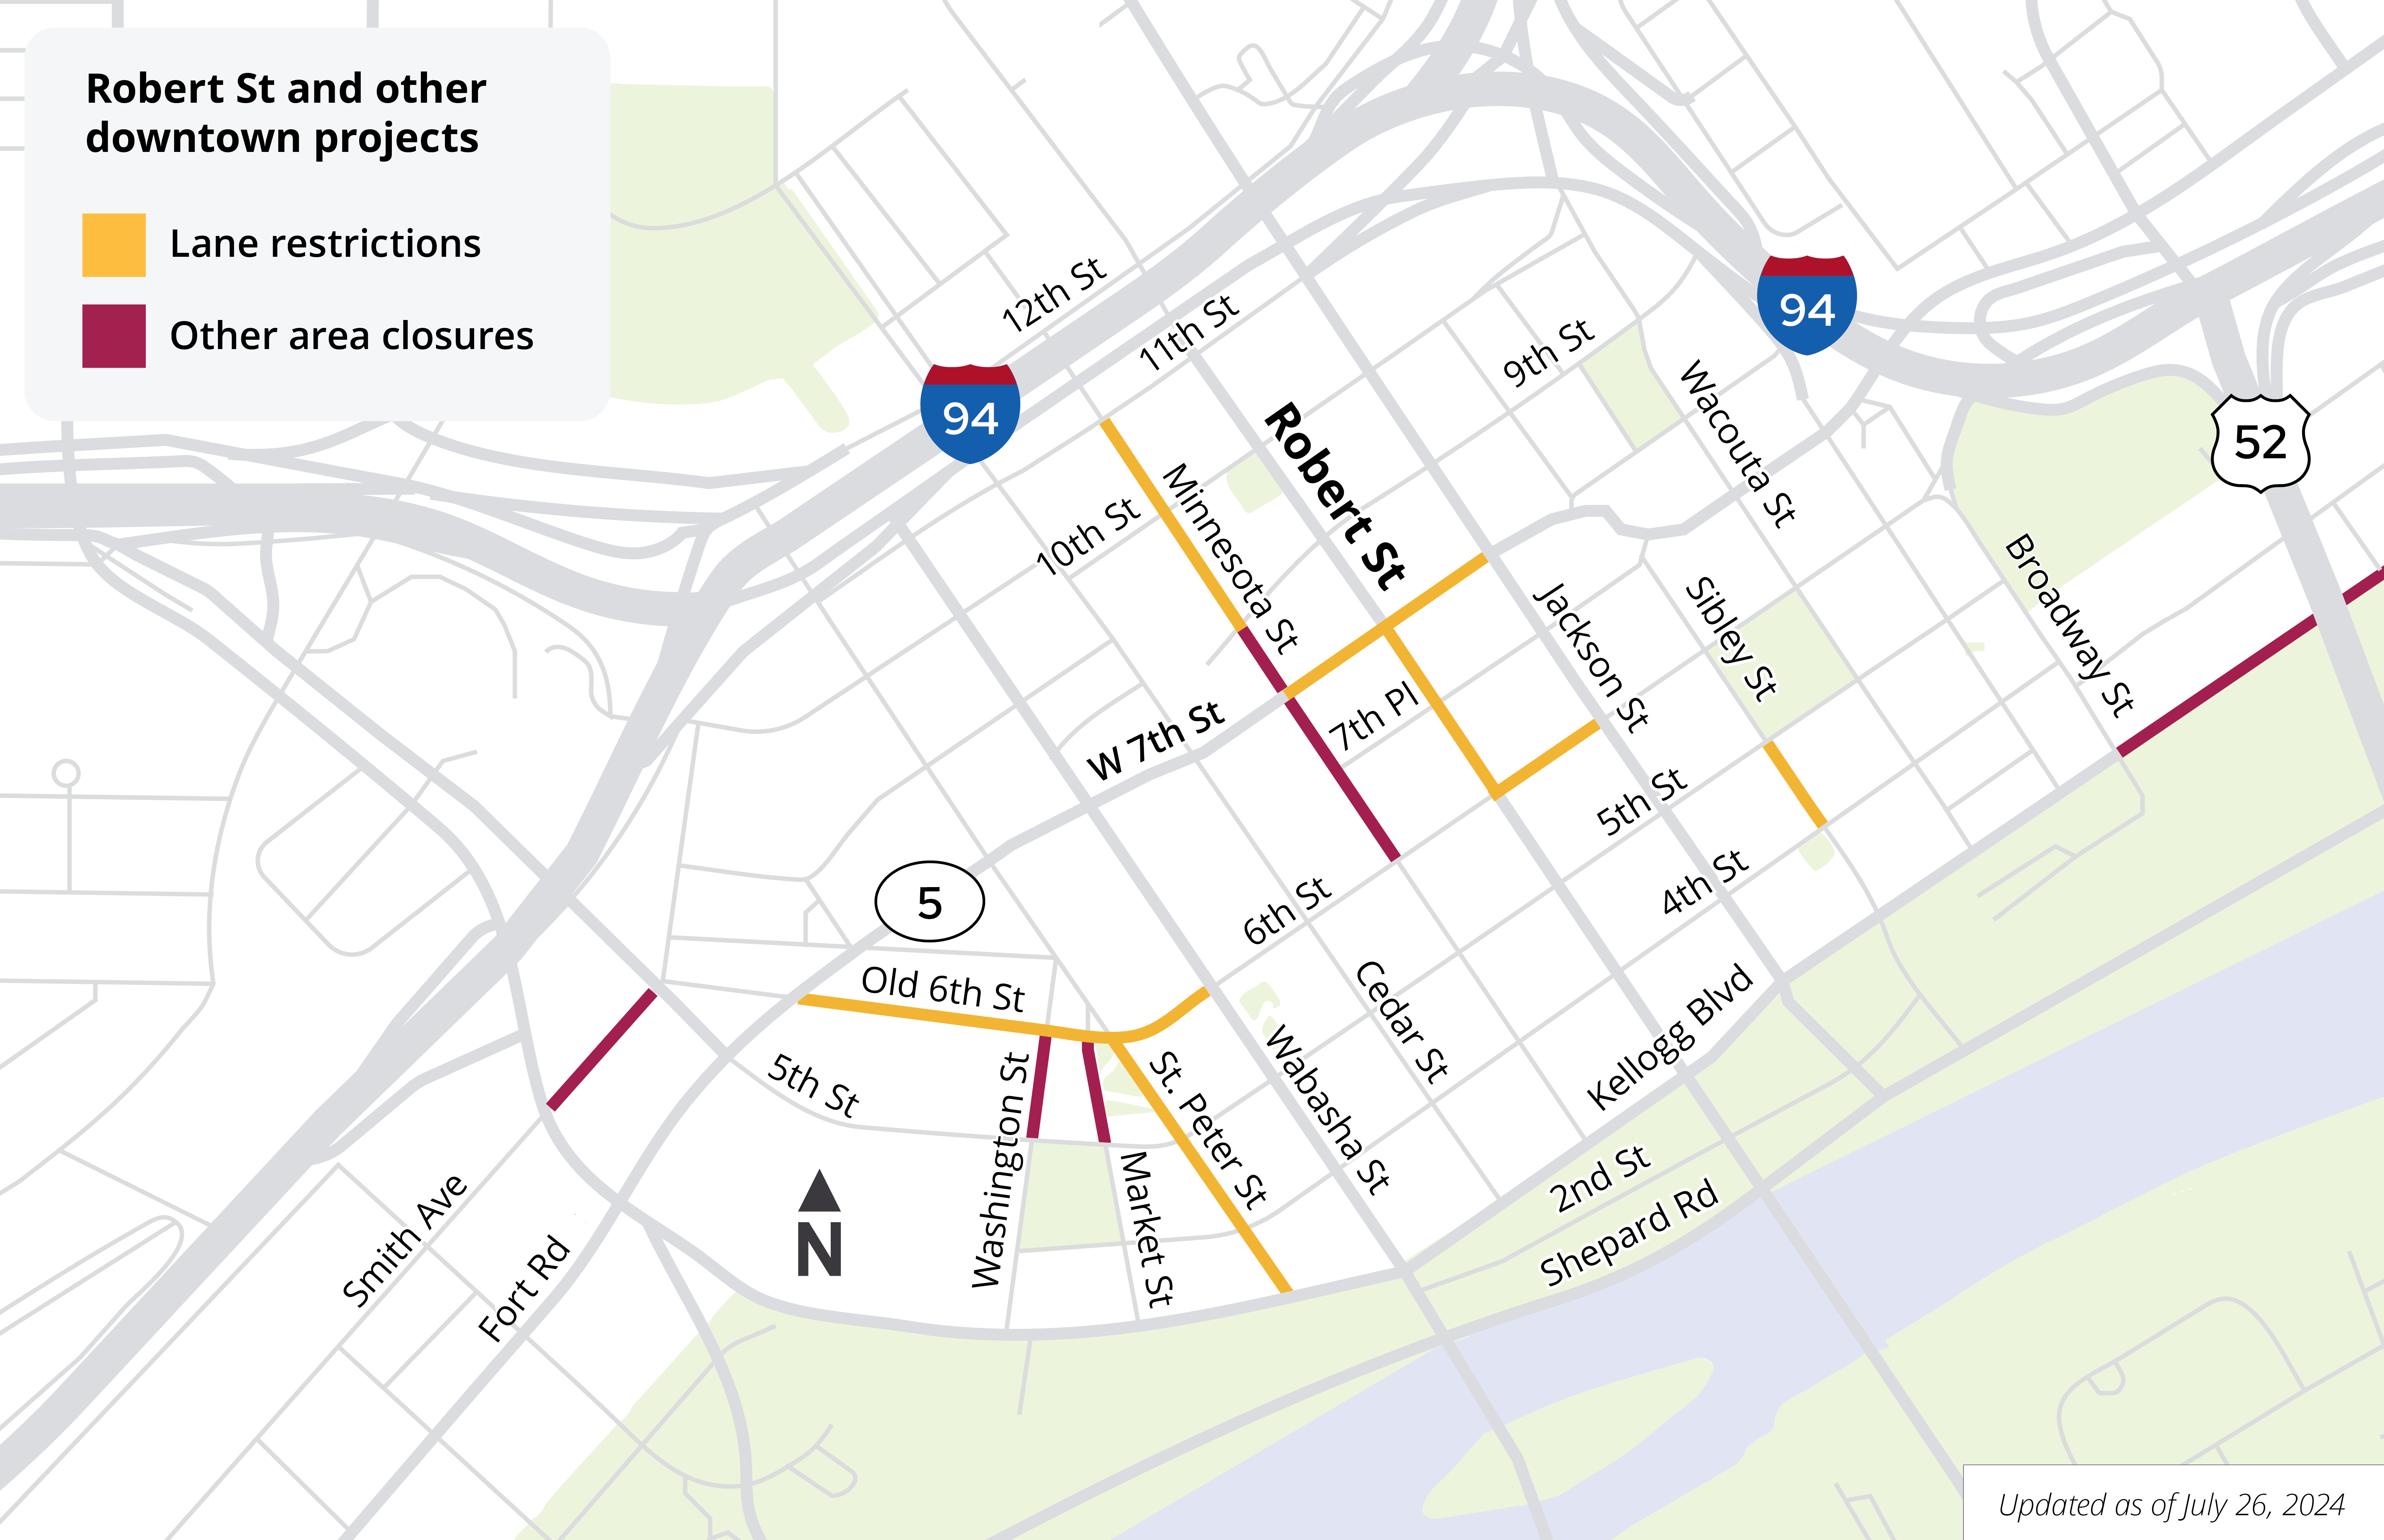 Map showing road and lane closures in downtown Saint Paul July 26, 2024